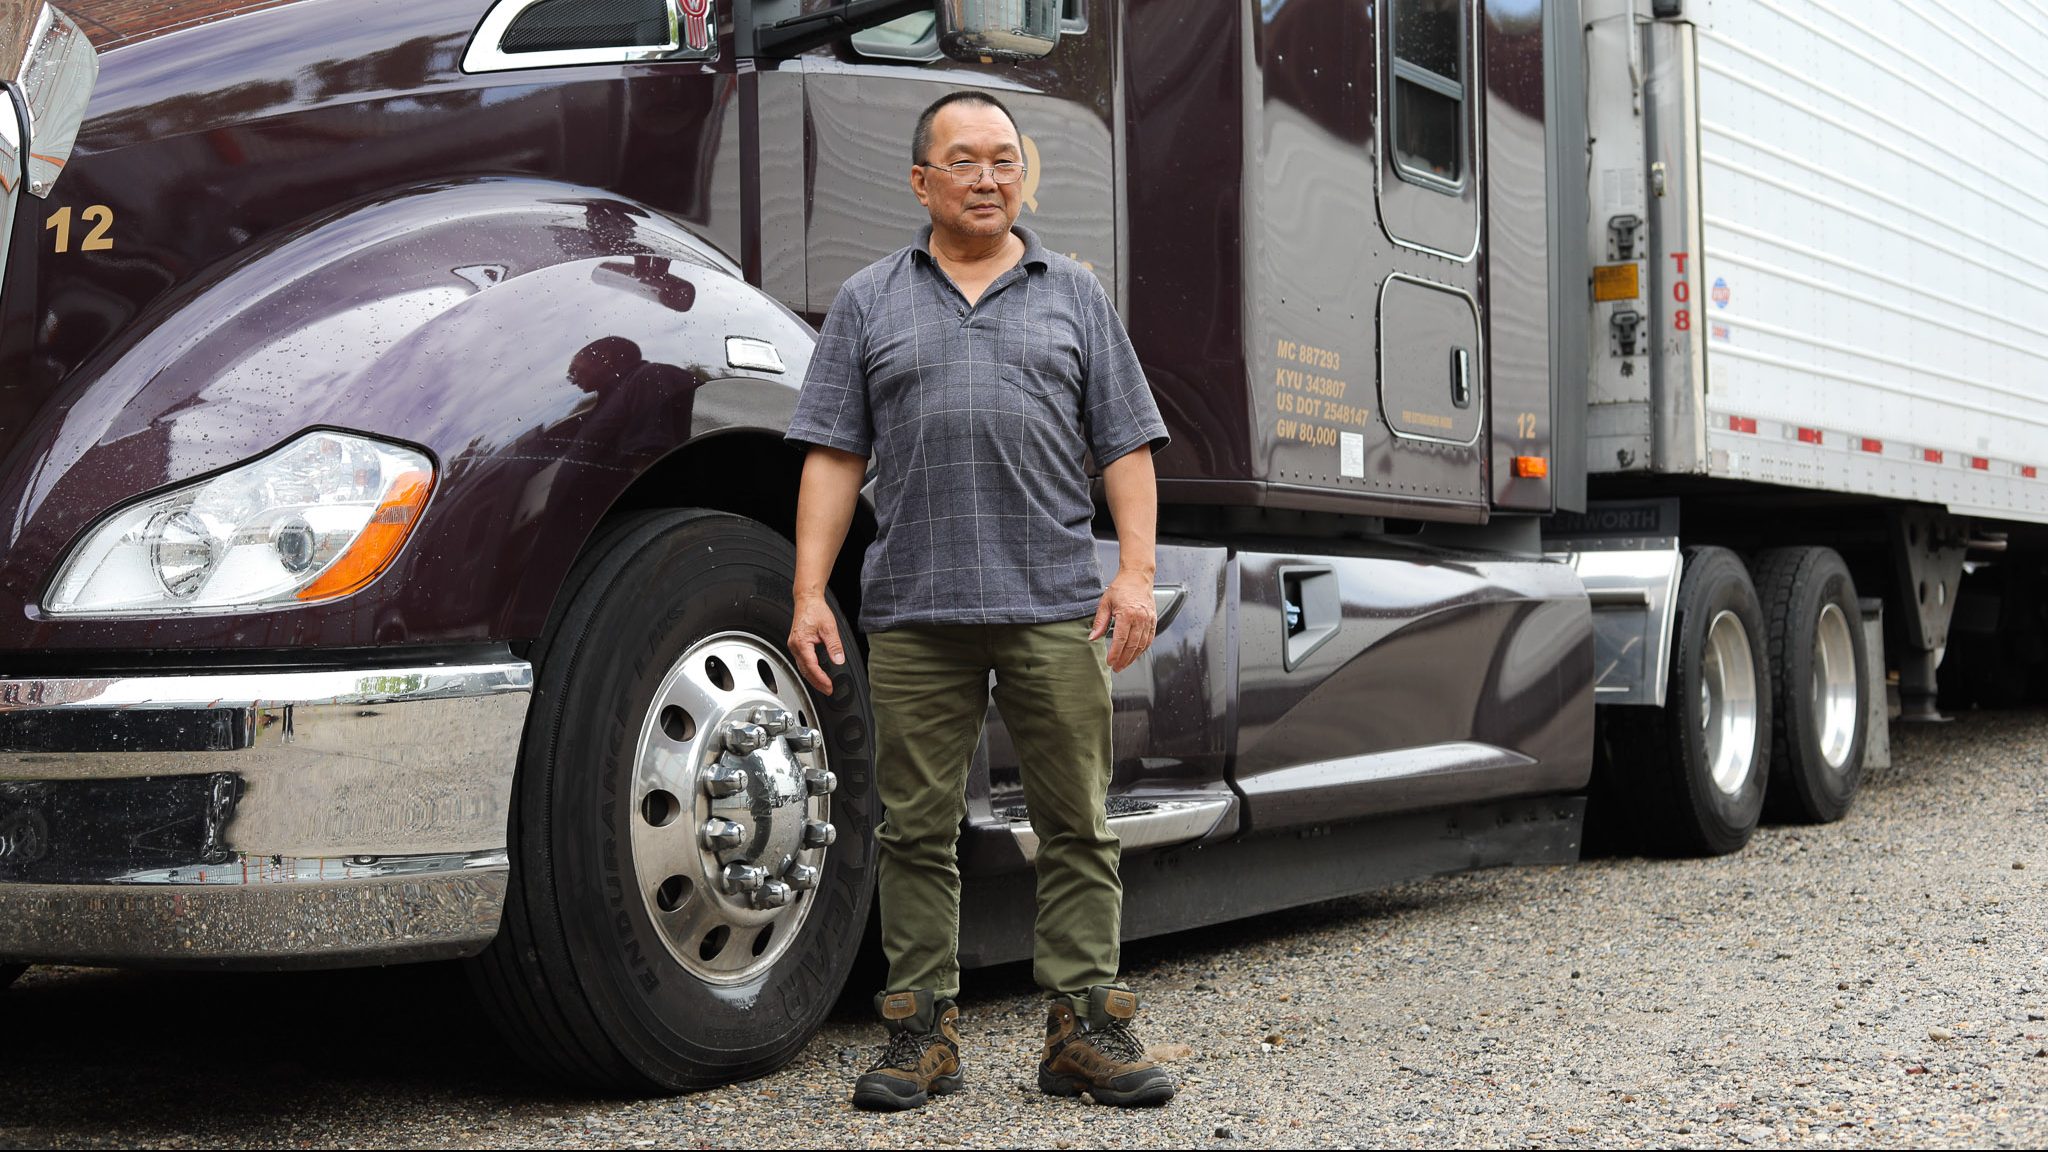 5 Ways to Support the Mental Health of Truck Drivers - Drive My Way